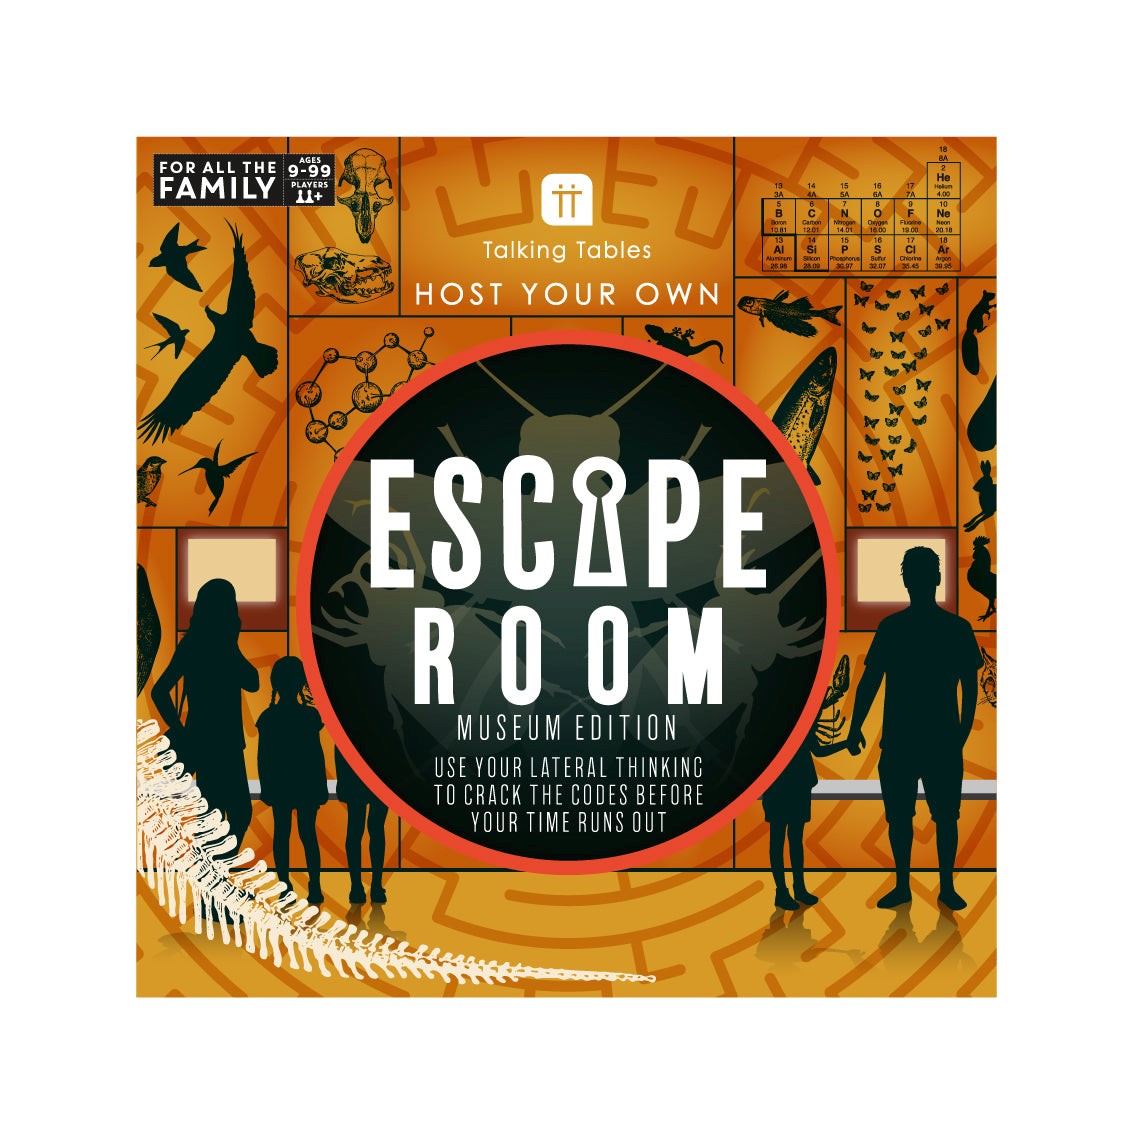 Host your own family escape room - museum edition